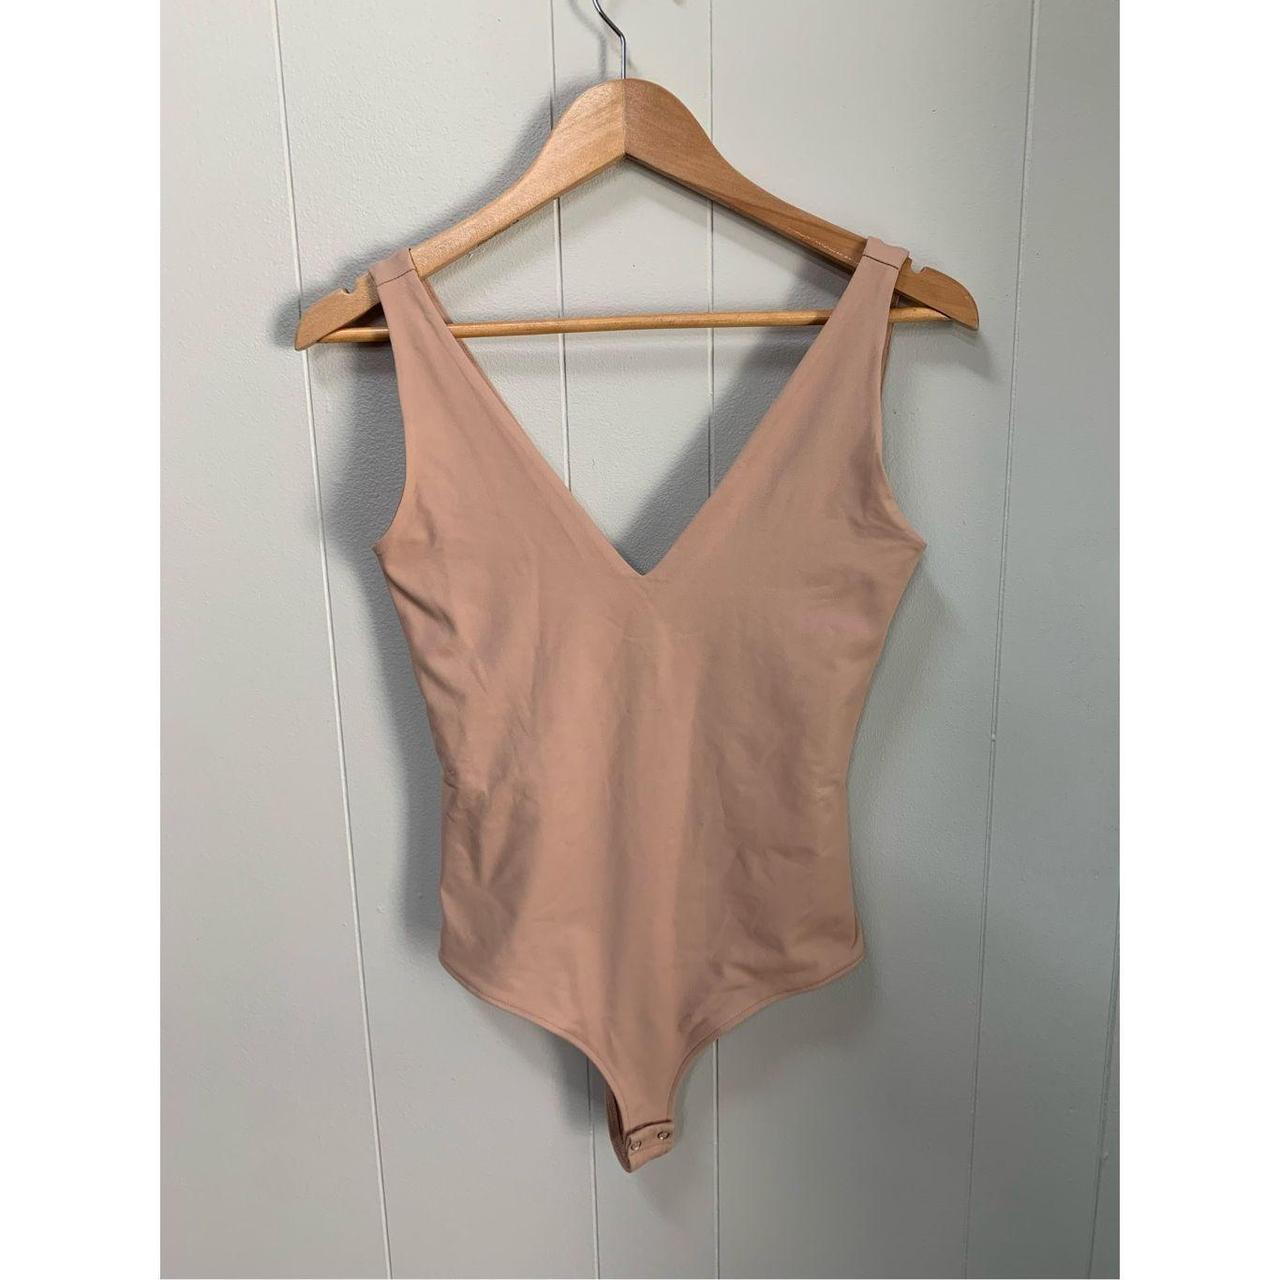  Womens Bodysuit Double Lined Sexy Plunge Deep V